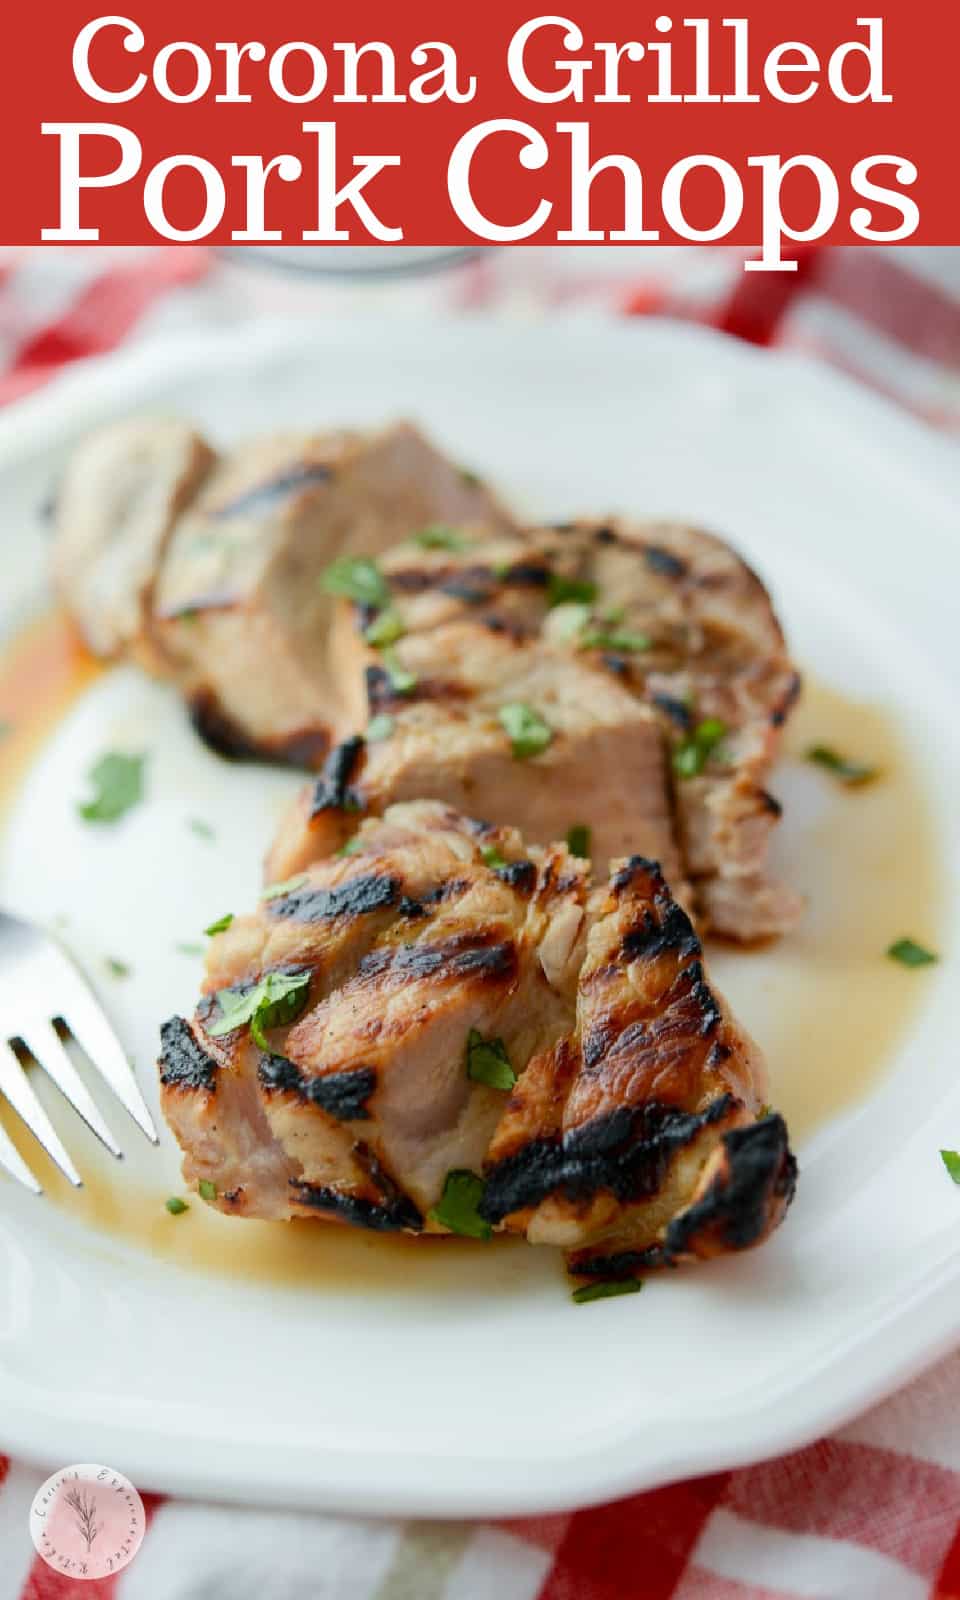 Corona Grilled Pork Chops | Carrie's Experimental Kitchen